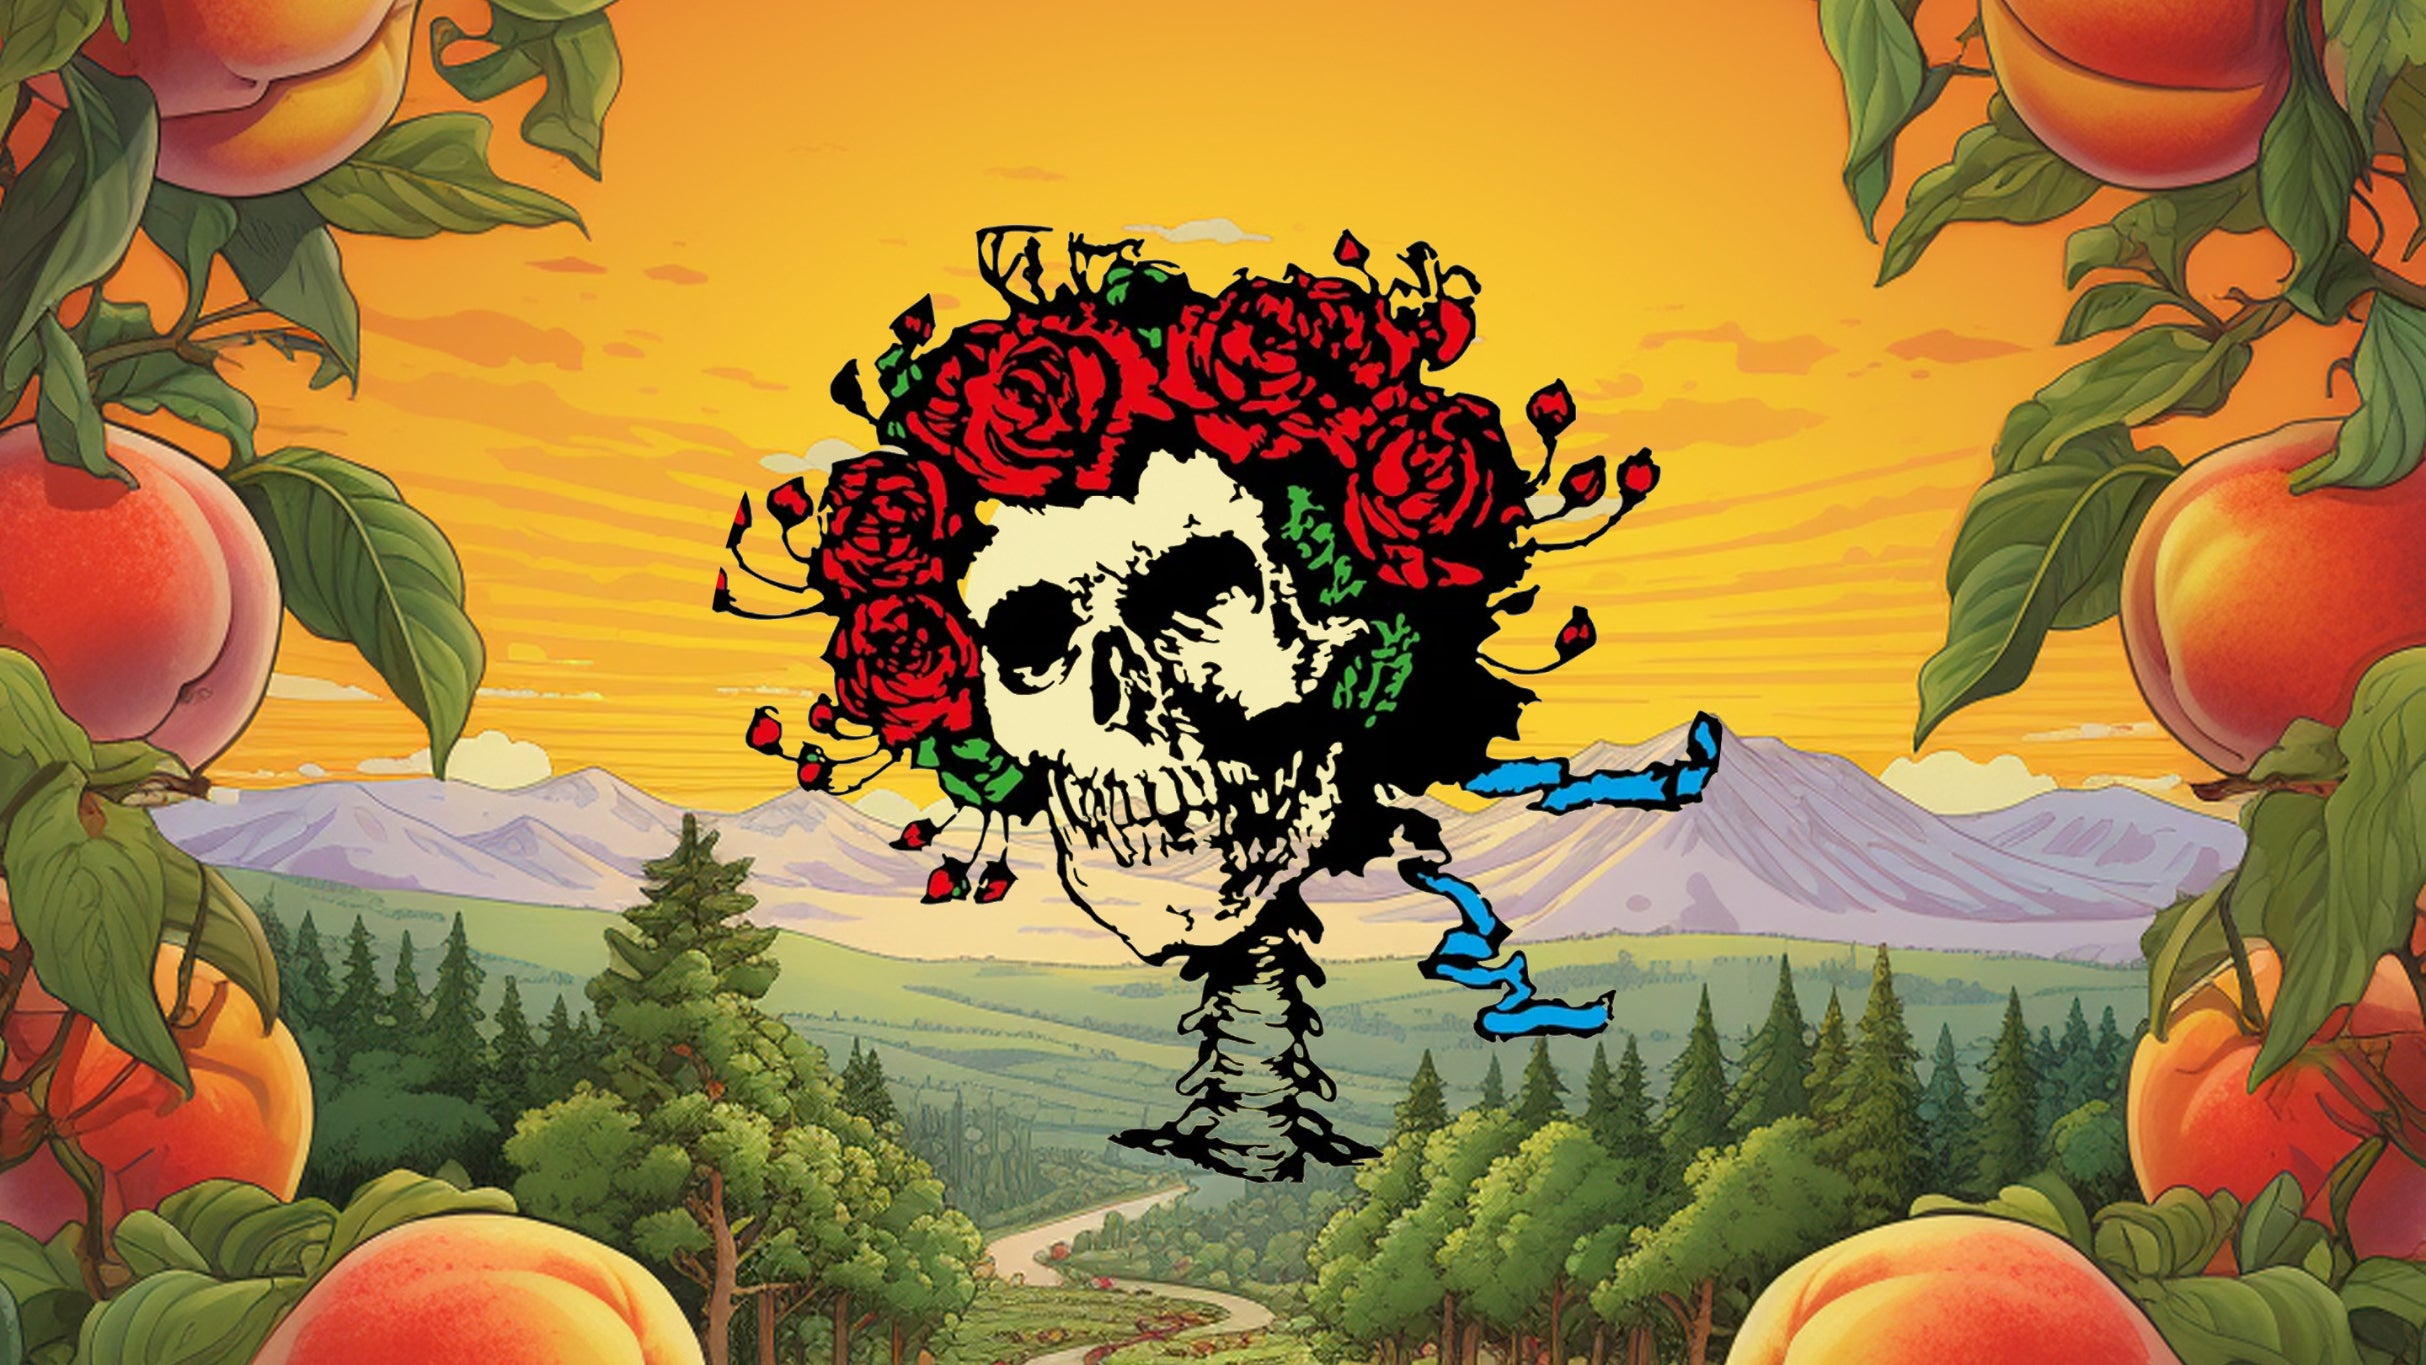 Live Dead & Brothers: An All-Star Celebration of Grateful Dead & Allma free presale code for early tickets in St Petersburg